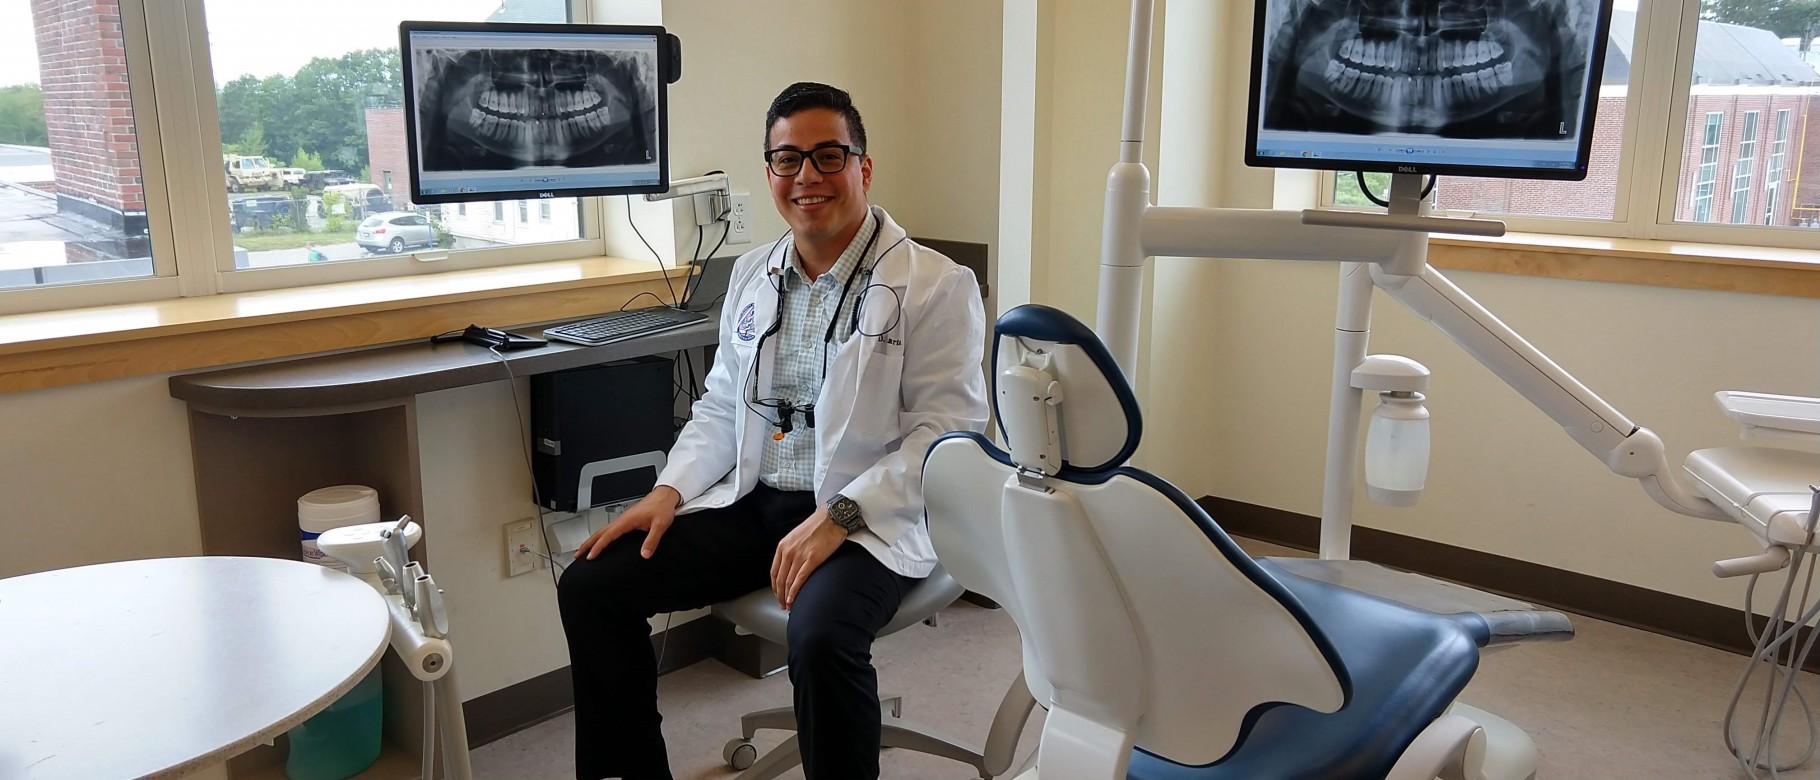 UNE student Daniel Duarte is completing a 12-week externship in Vermont 